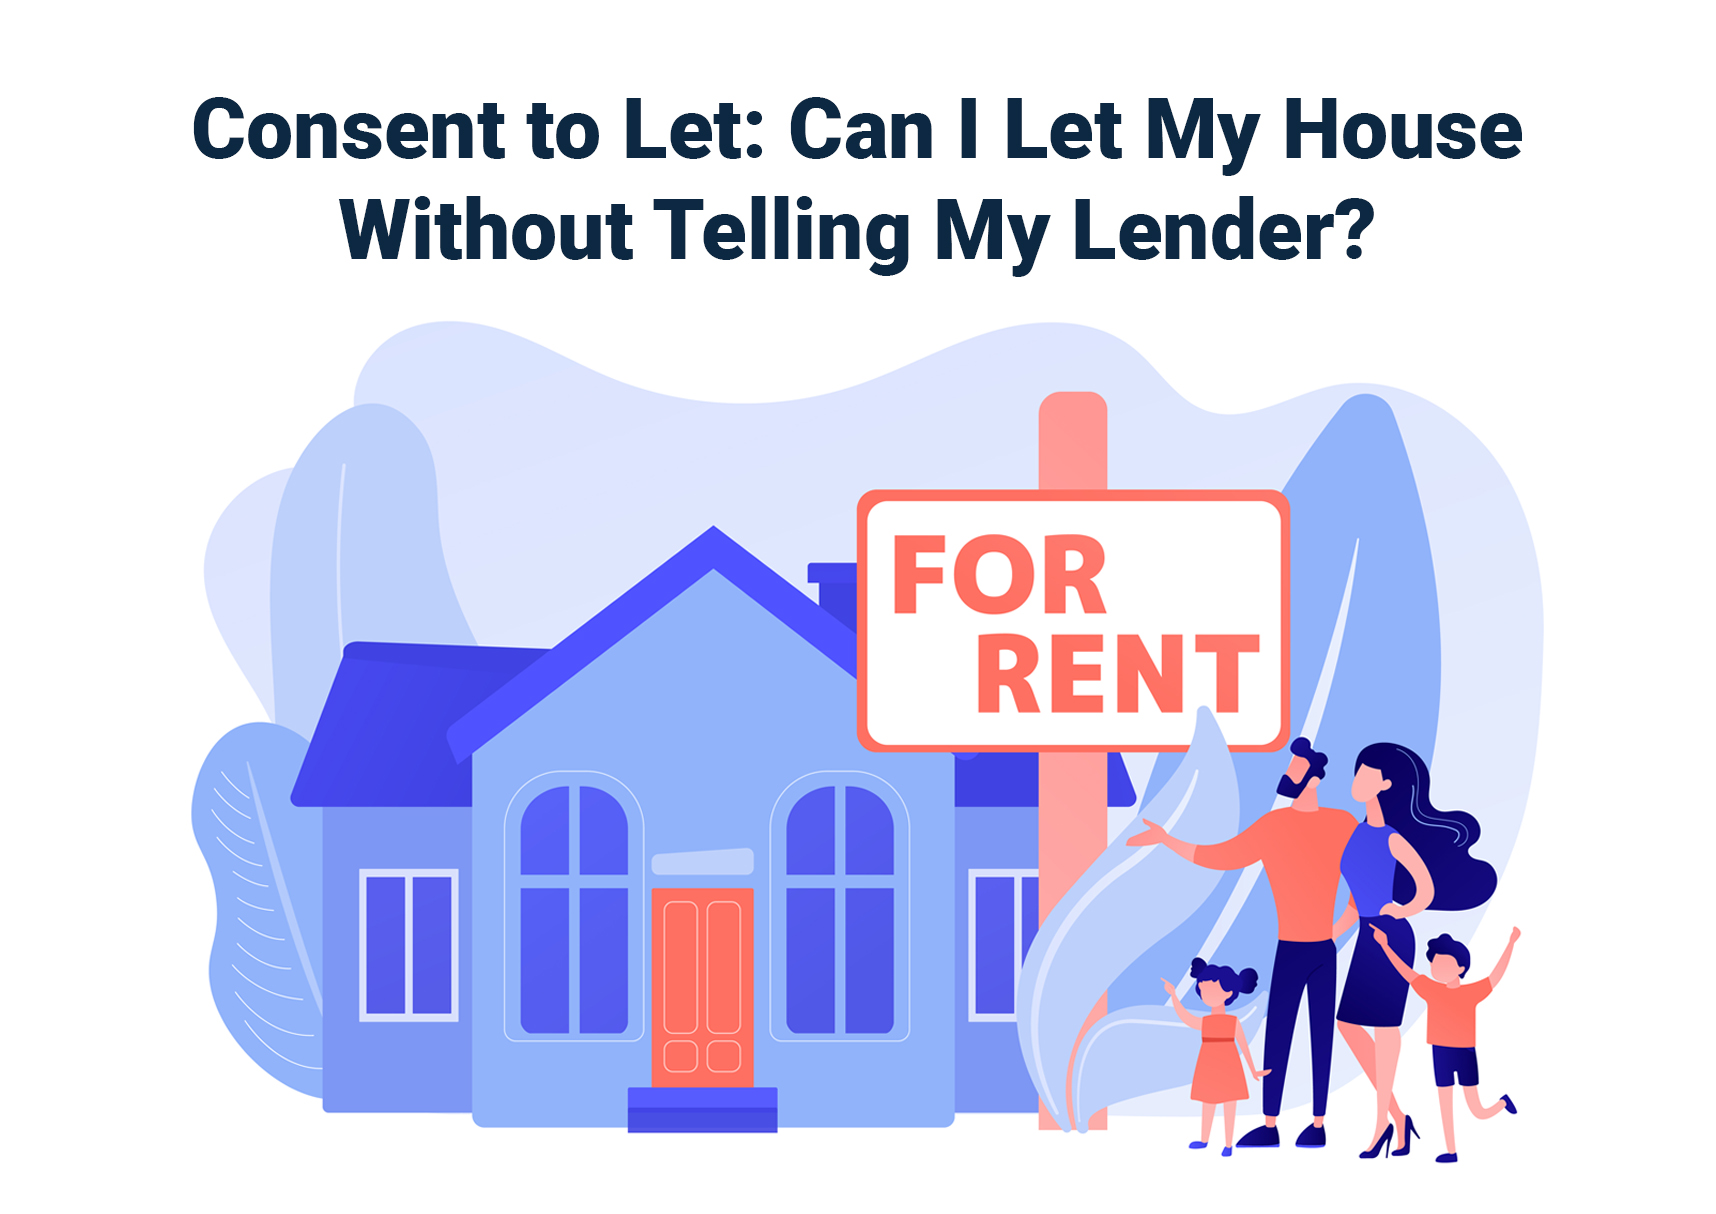 Consent to Let: Can I Let My House Without Telling My Lender?